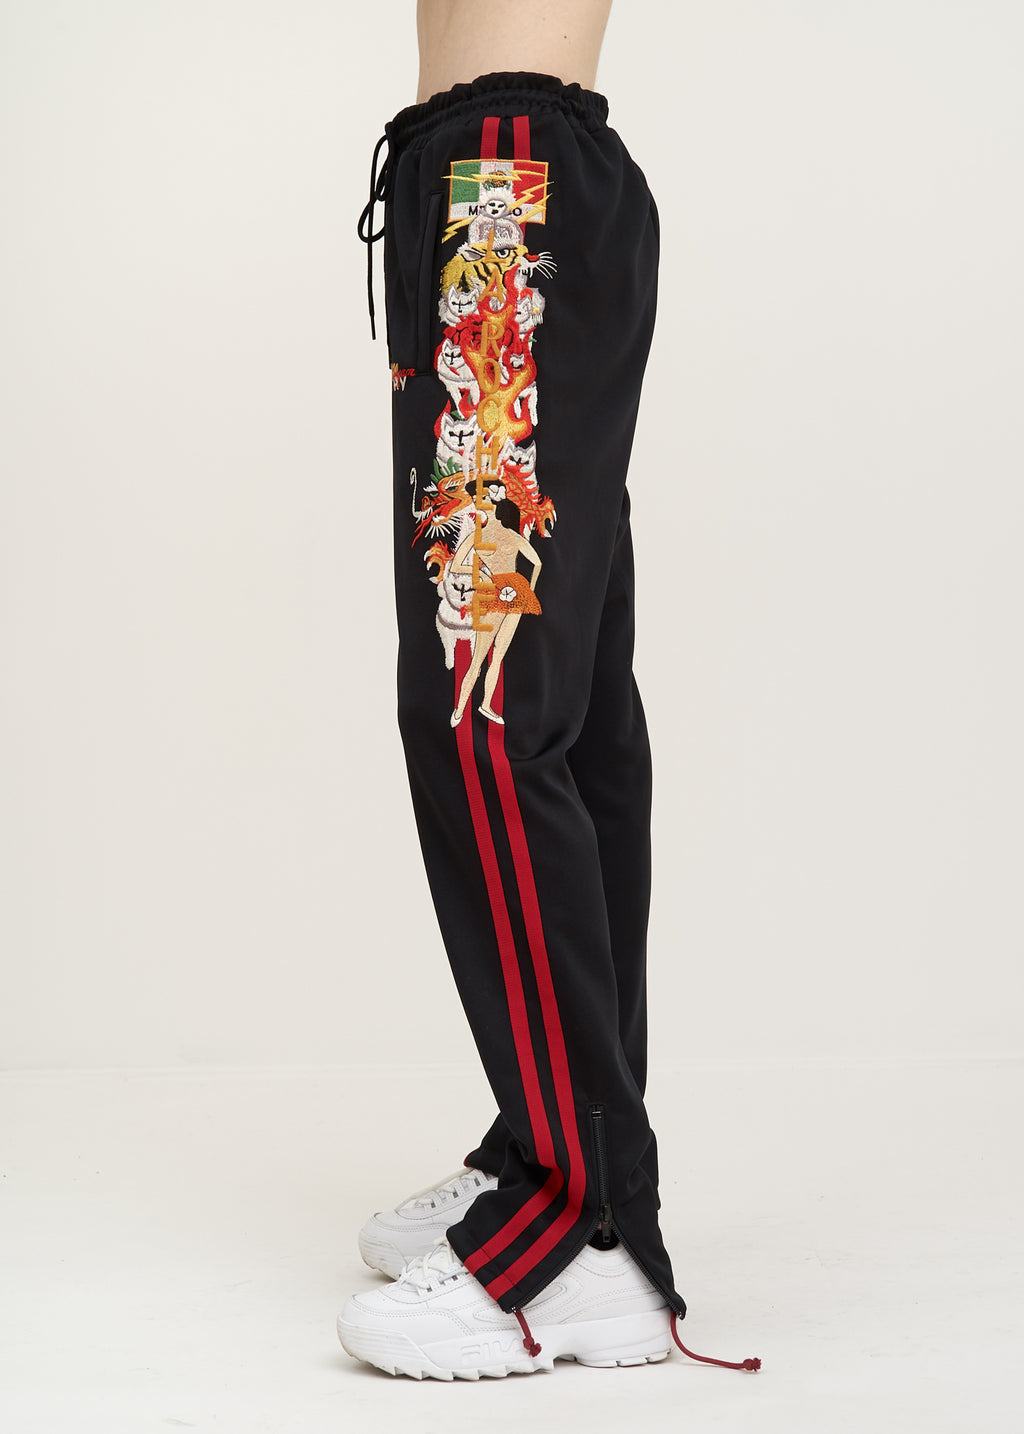 doublet ダブレット 17AW CHAOS EMBROIDERY TRACK PANTS カオス刺